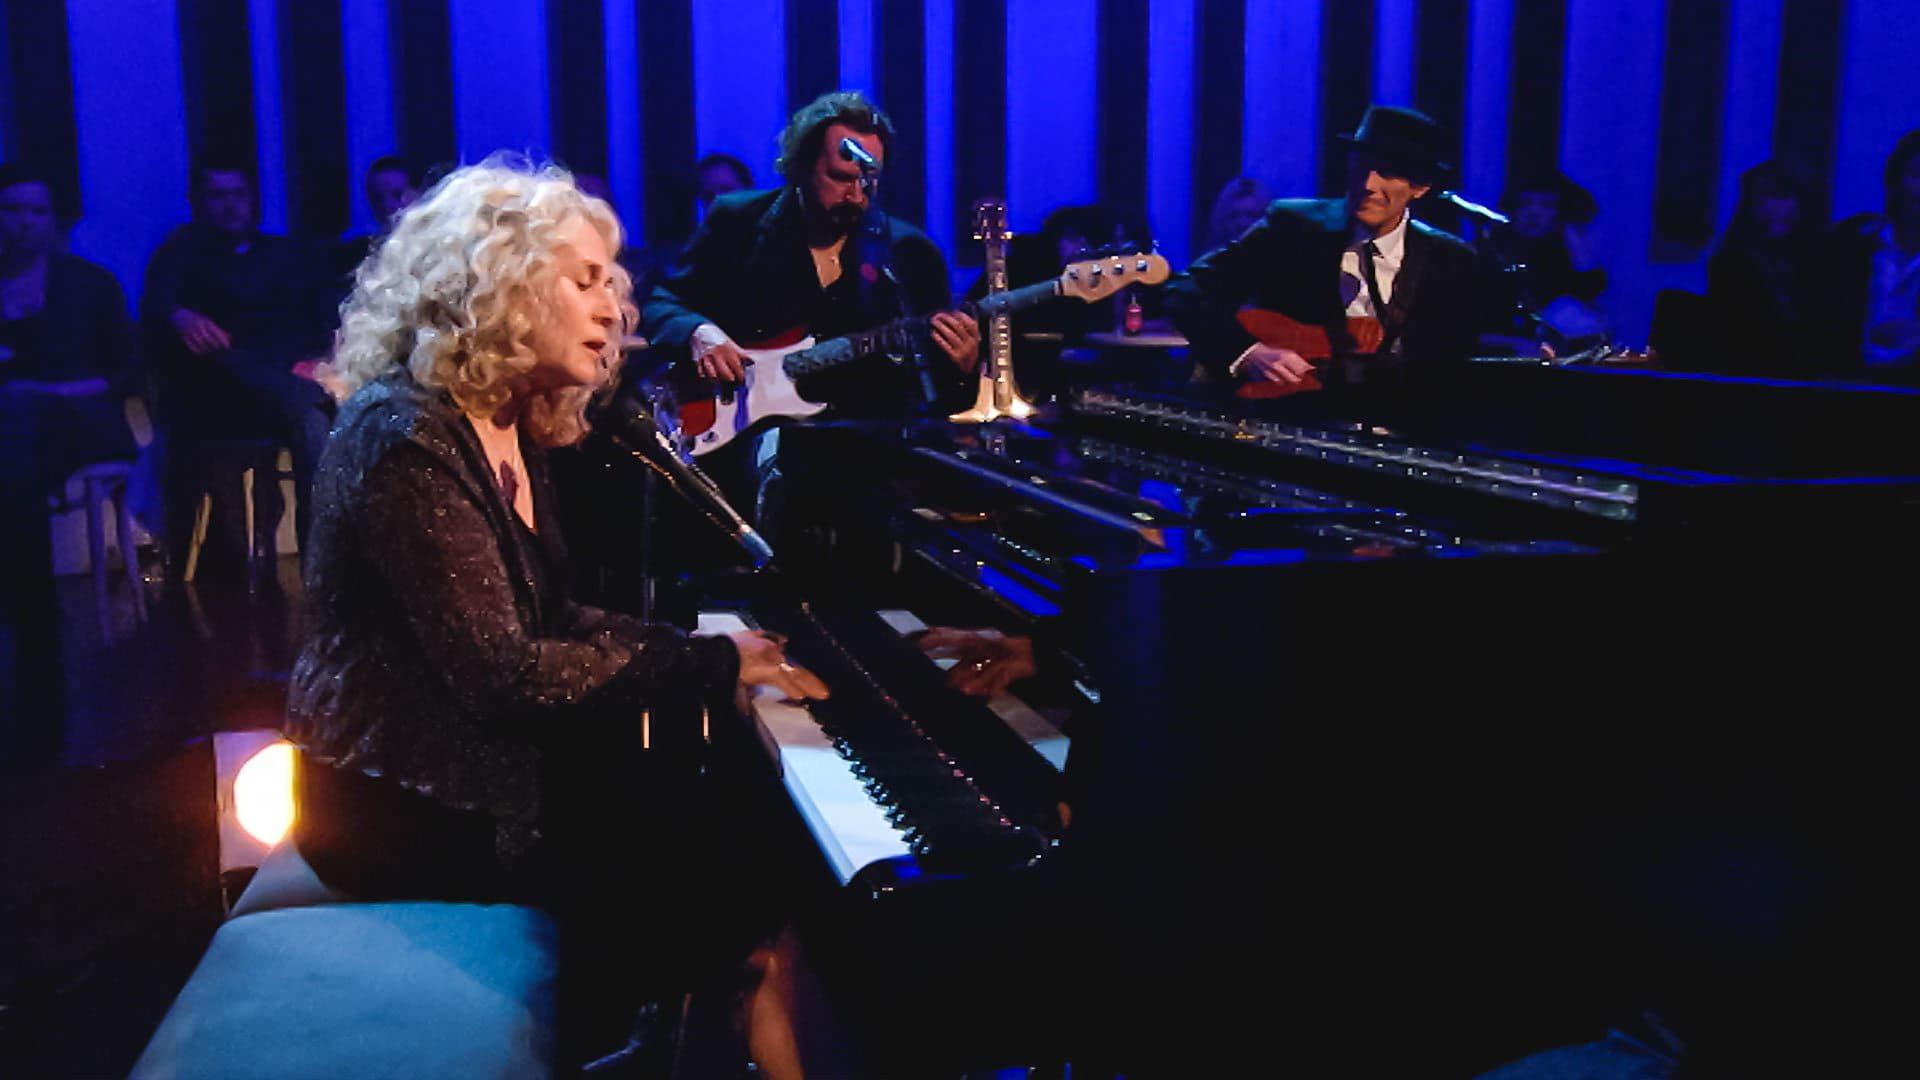 Carole King and her Songs at the BBC backdrop